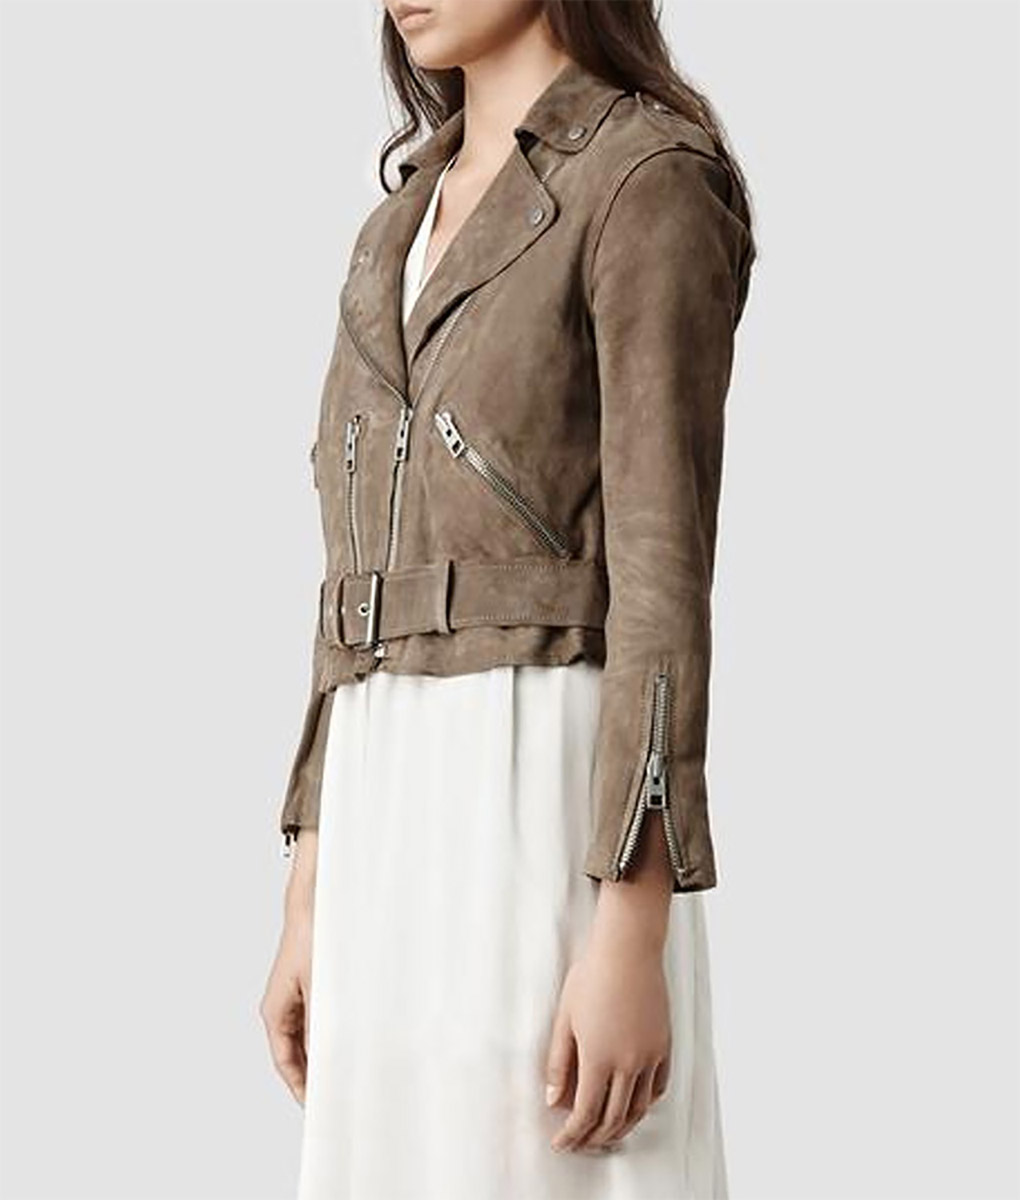 Ophelia Pryce The Royals Brown Suede Leather Jacket (1)